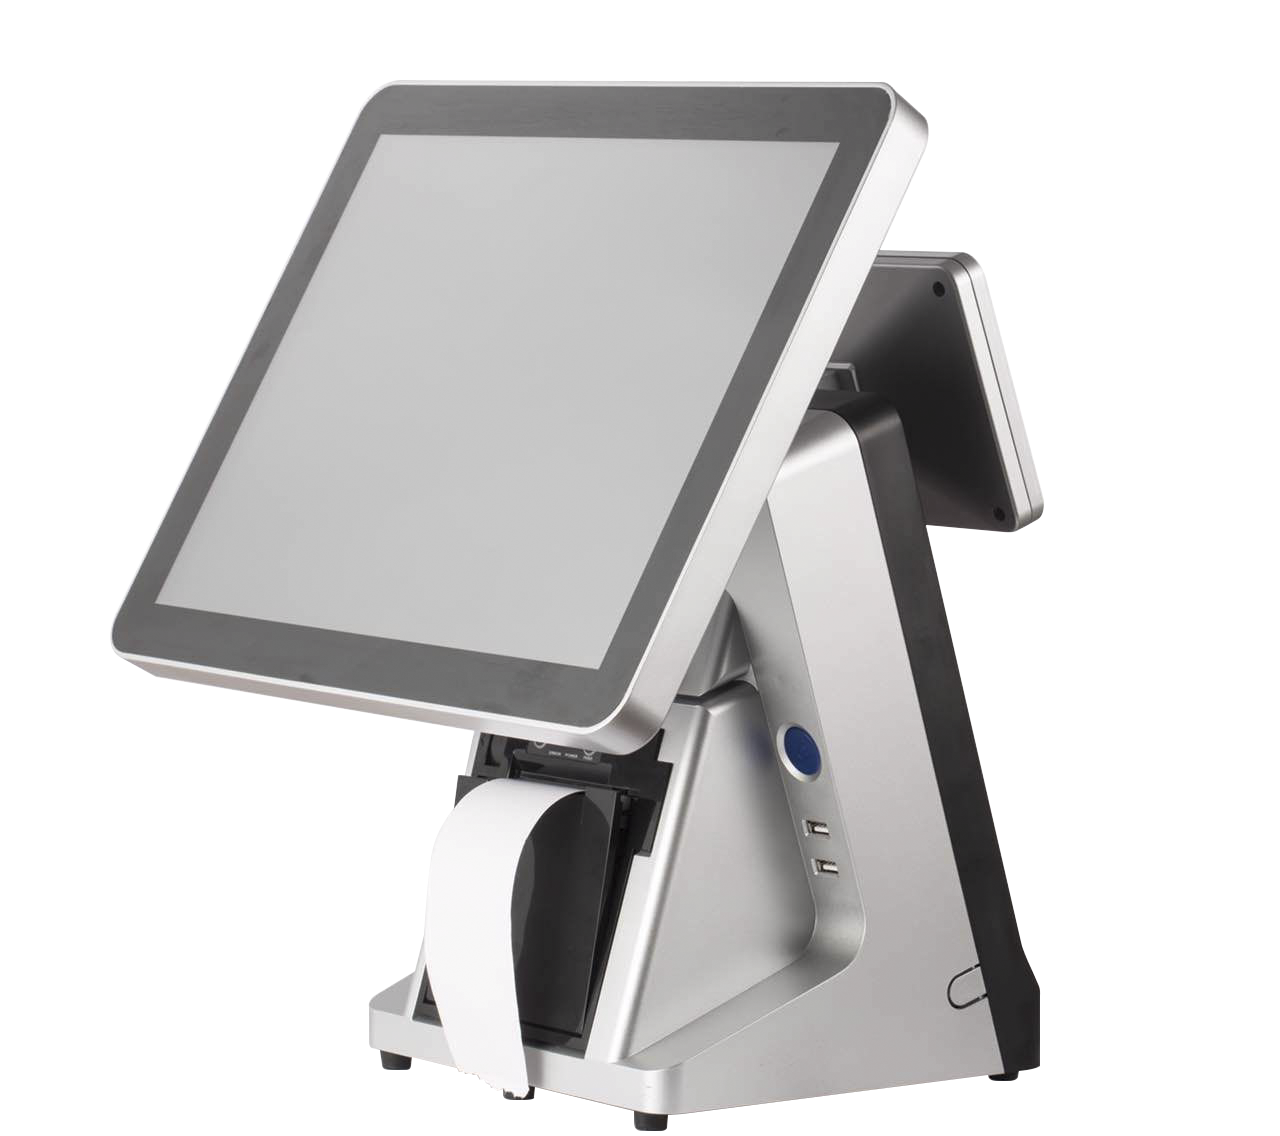 POS-C15-A 15 inch Andorid all in one touch POS terminal machine